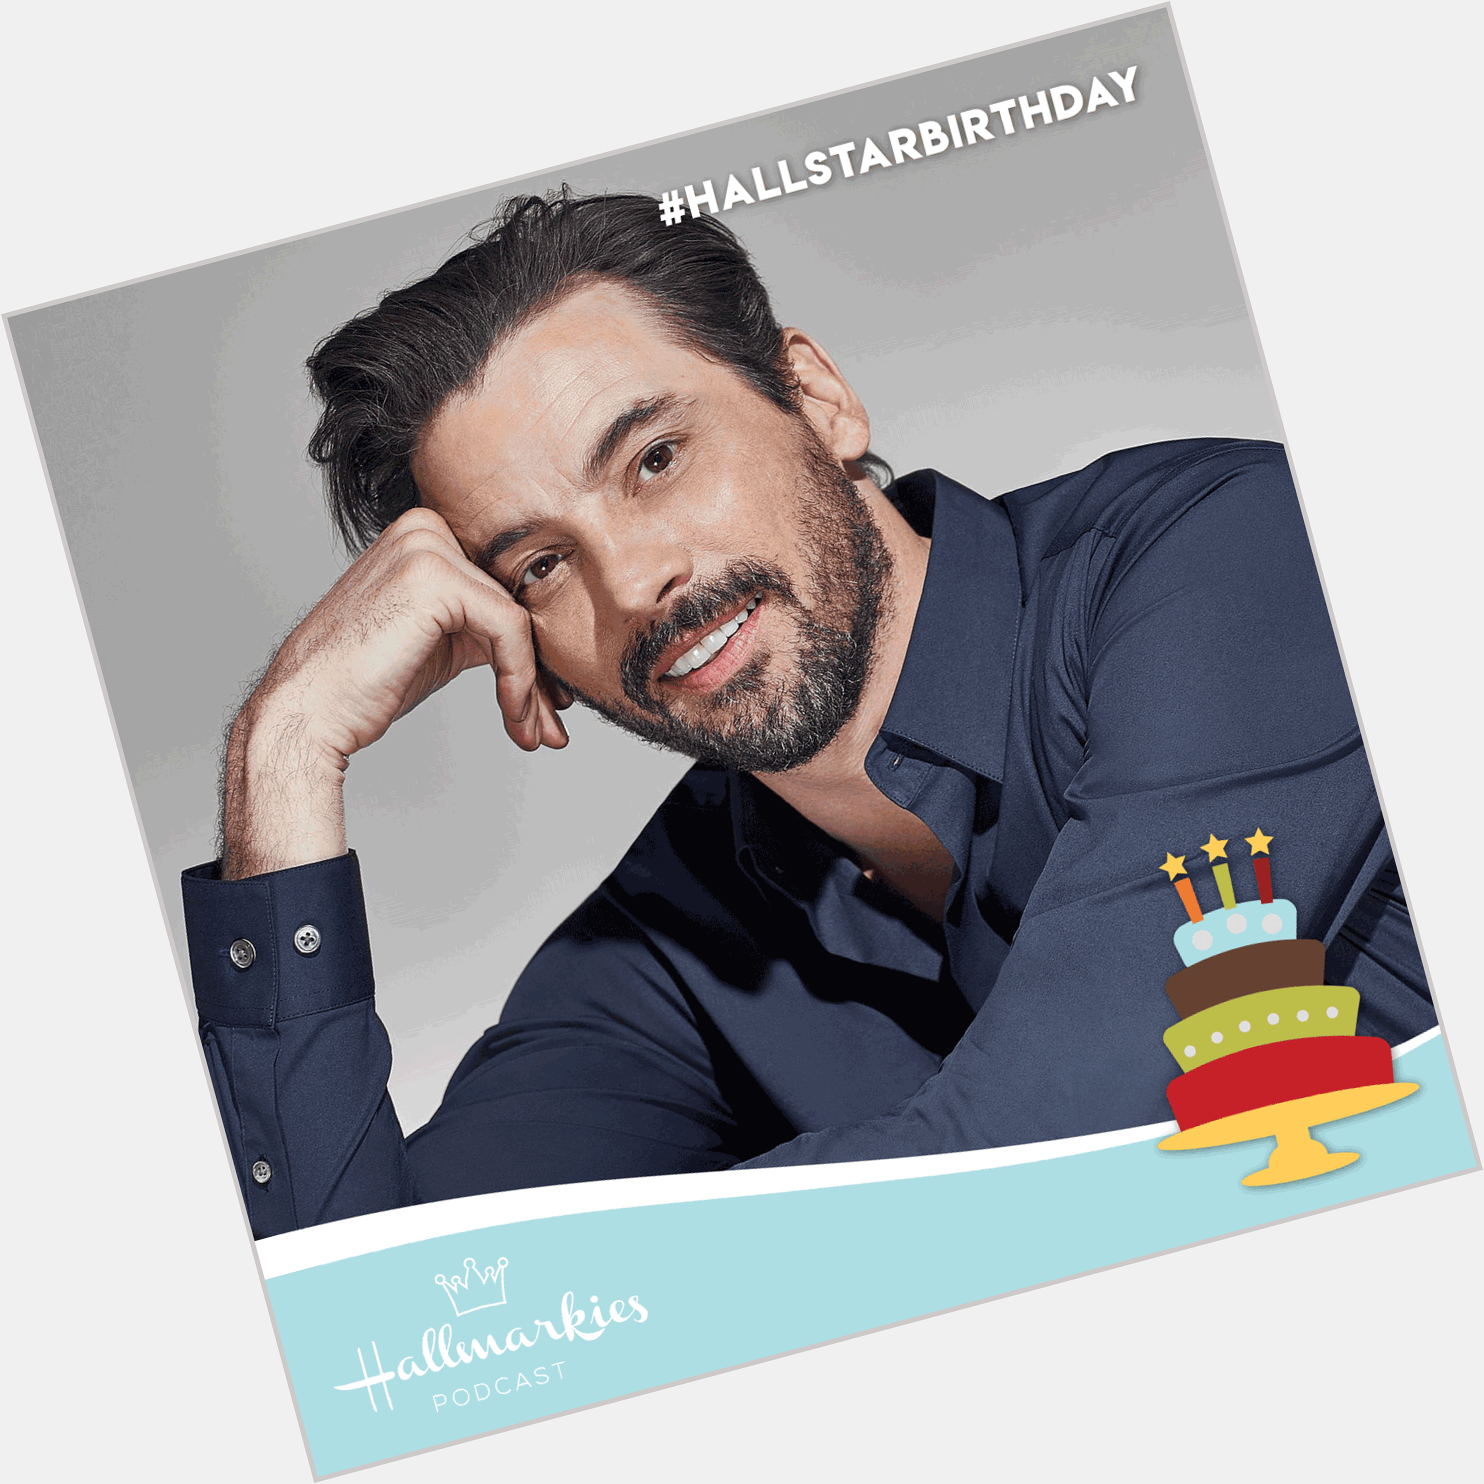 Wishing Skeet Ulrich a very happy birthday today!   